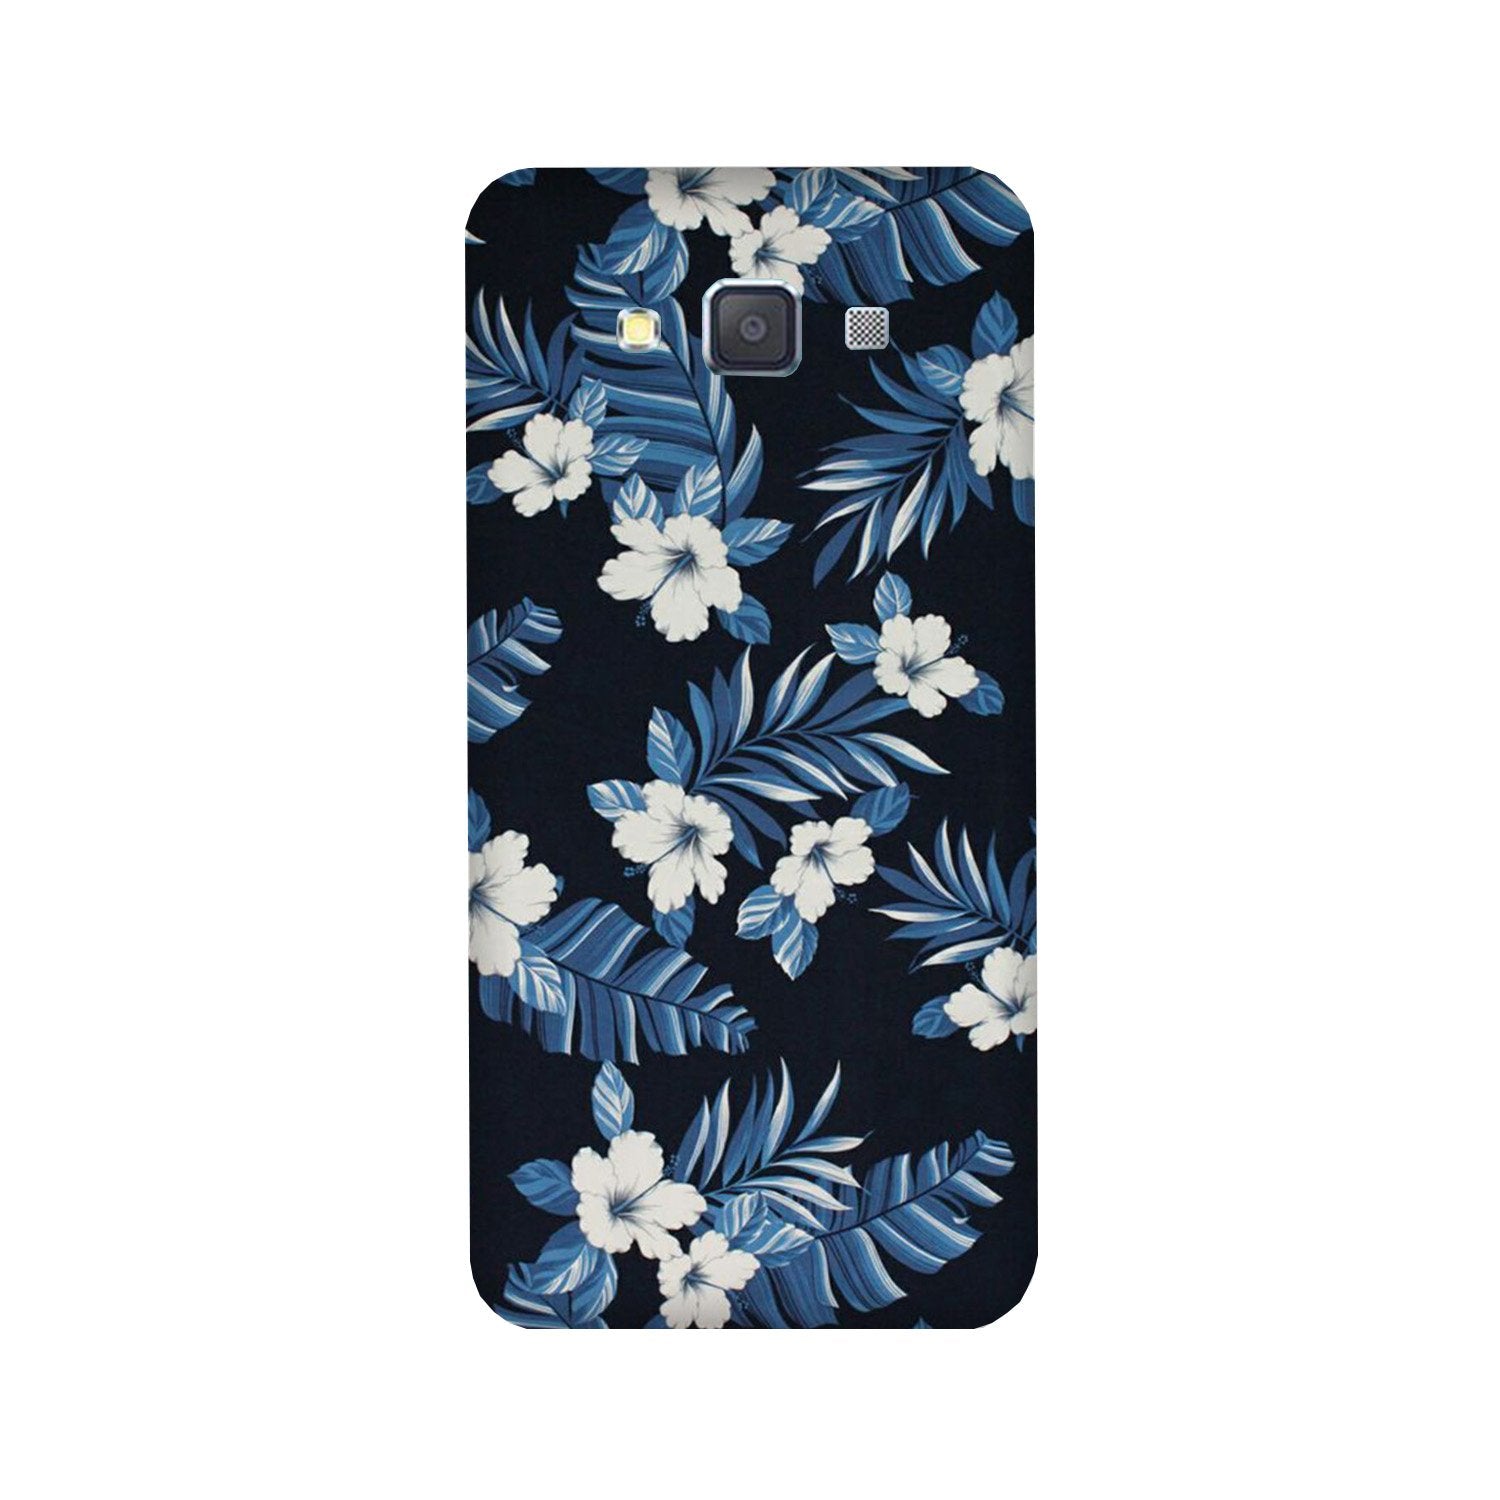 White flowers Blue Background2 Case for Galaxy E7